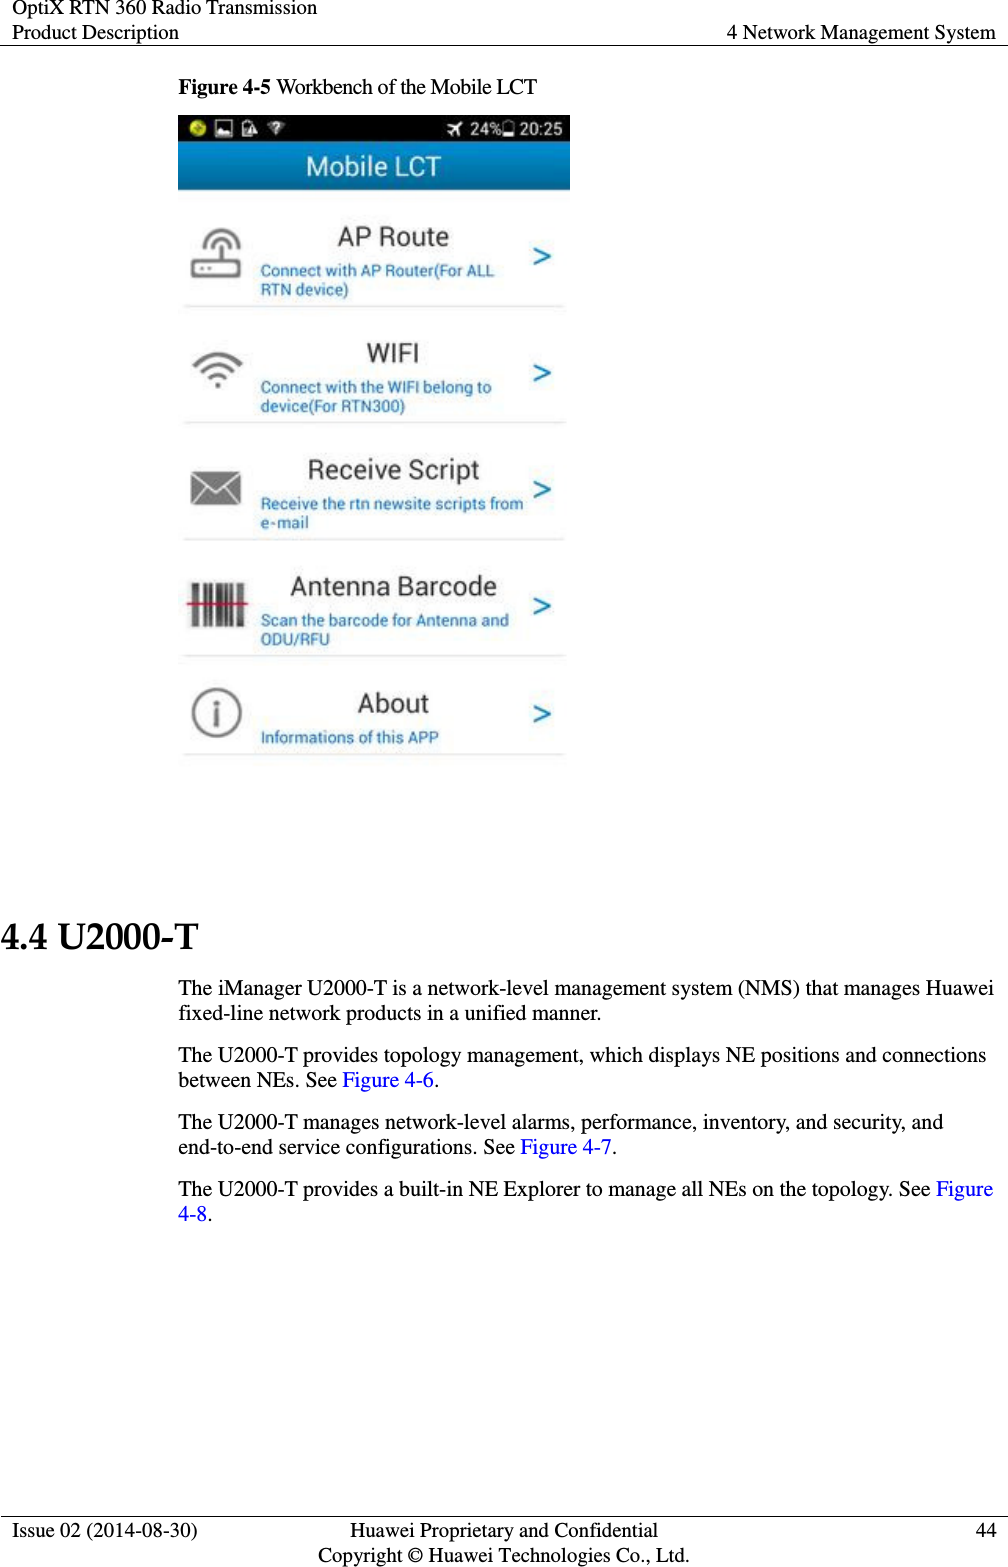 OptiX RTN 360 Radio Transmission Product Description 4 Network Management System  Issue 02 (2014-08-30) Huawei Proprietary and Confidential                                     Copyright © Huawei Technologies Co., Ltd. 44  Figure 4-5 Workbench of the Mobile LCT   4.4 U2000-T The iManager U2000-T is a network-level management system (NMS) that manages Huawei fixed-line network products in a unified manner. The U2000-T provides topology management, which displays NE positions and connections between NEs. See Figure 4-6. The U2000-T manages network-level alarms, performance, inventory, and security, and end-to-end service configurations. See Figure 4-7. The U2000-T provides a built-in NE Explorer to manage all NEs on the topology. See Figure 4-8. 